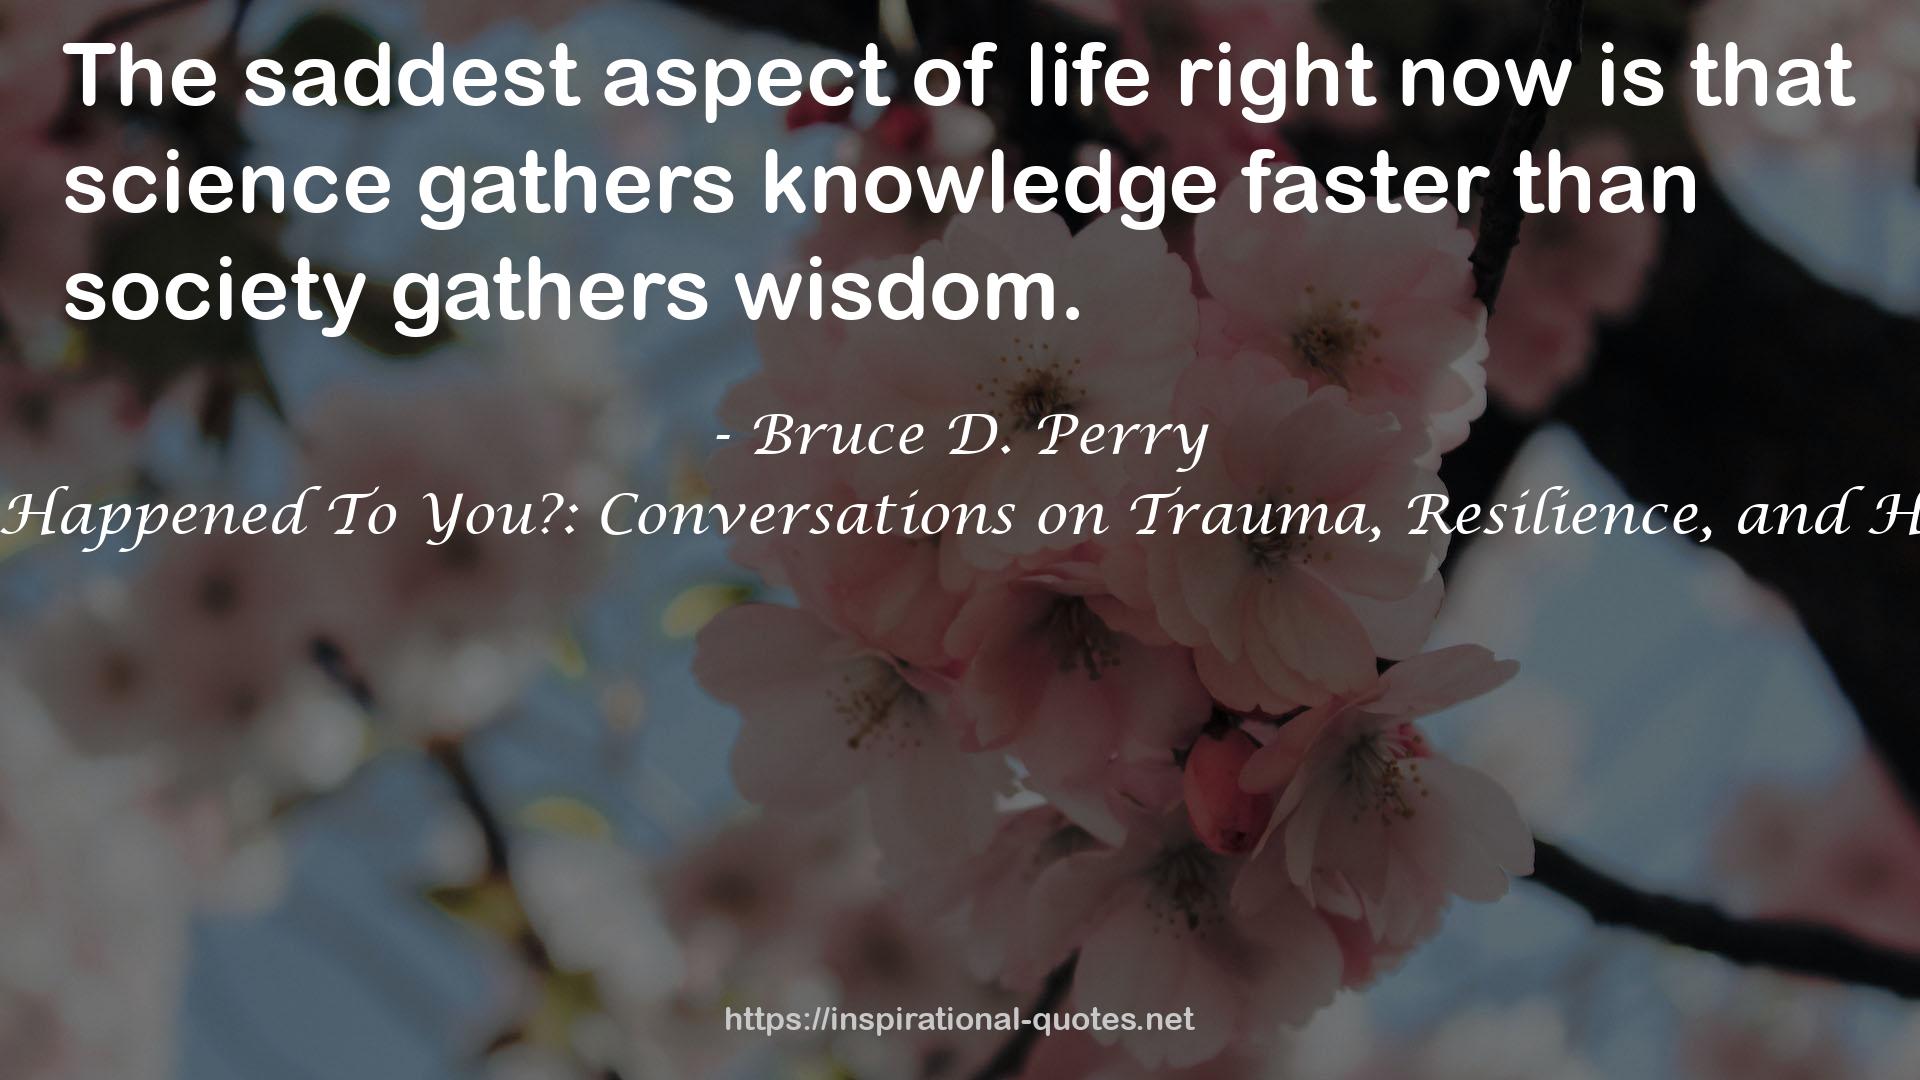 Bruce D. Perry QUOTES